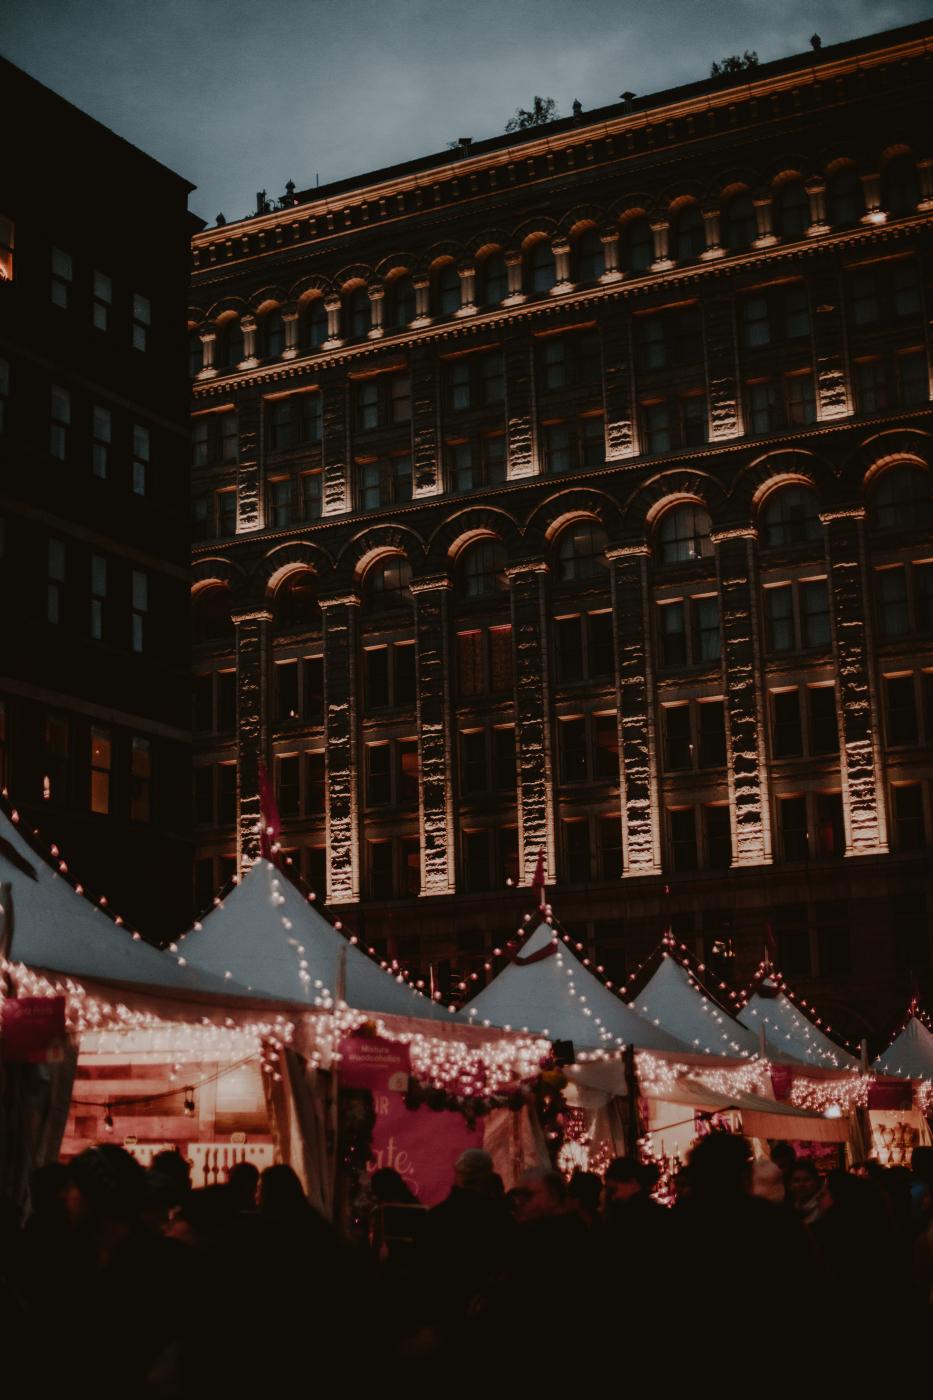 Holiday Market | Buy this image